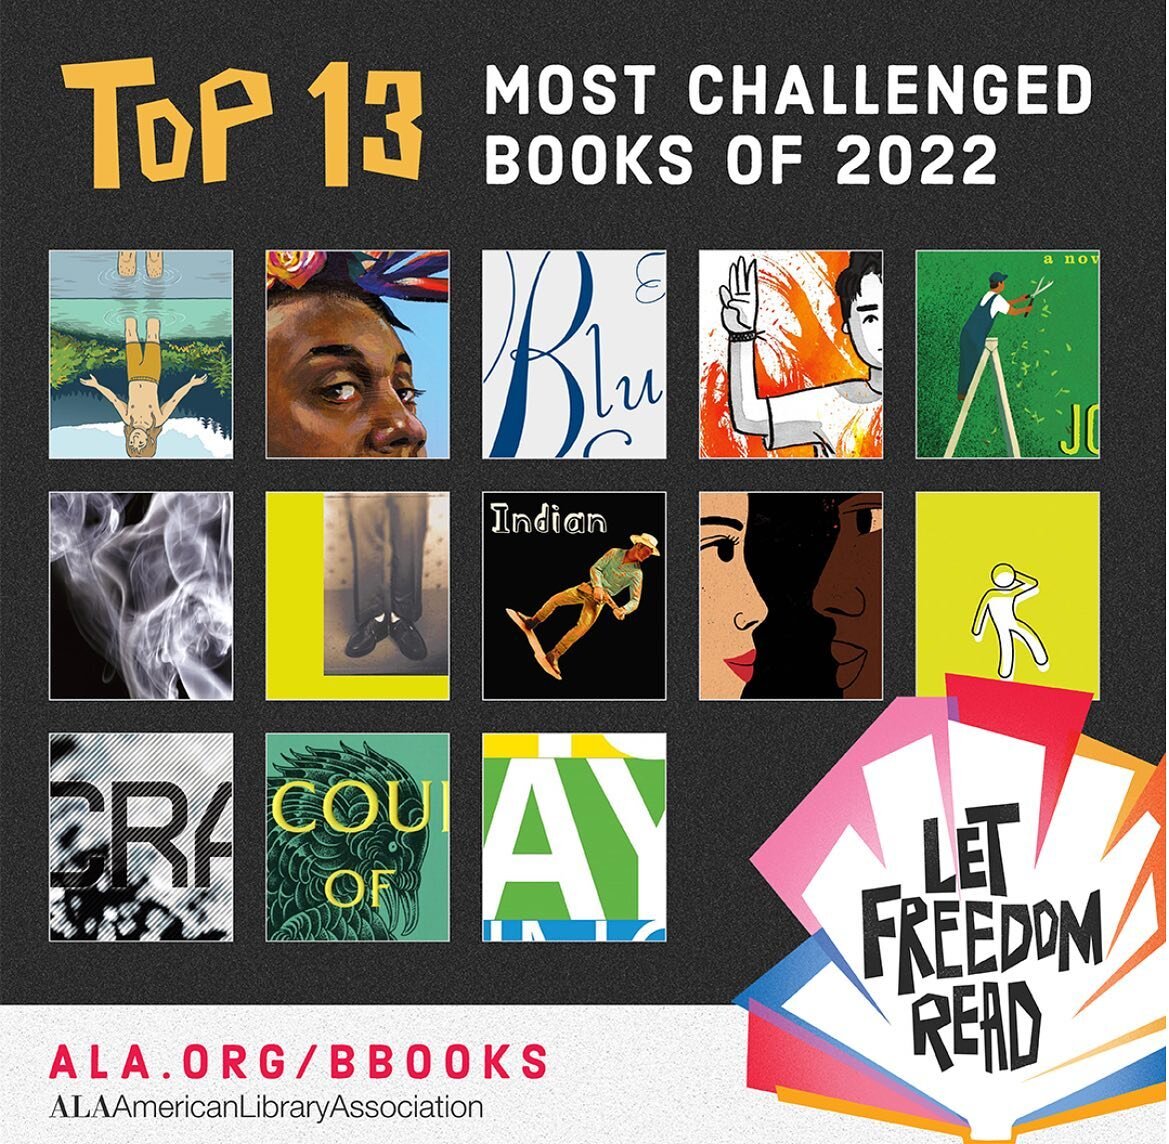 &ldquo;The American Library Association condemns censorship and works to defend each person's right to read under the First Amendment and ensure free access to information. Every year, ALA's Office for Intellectual Freedom (OIF) compiles a list of th